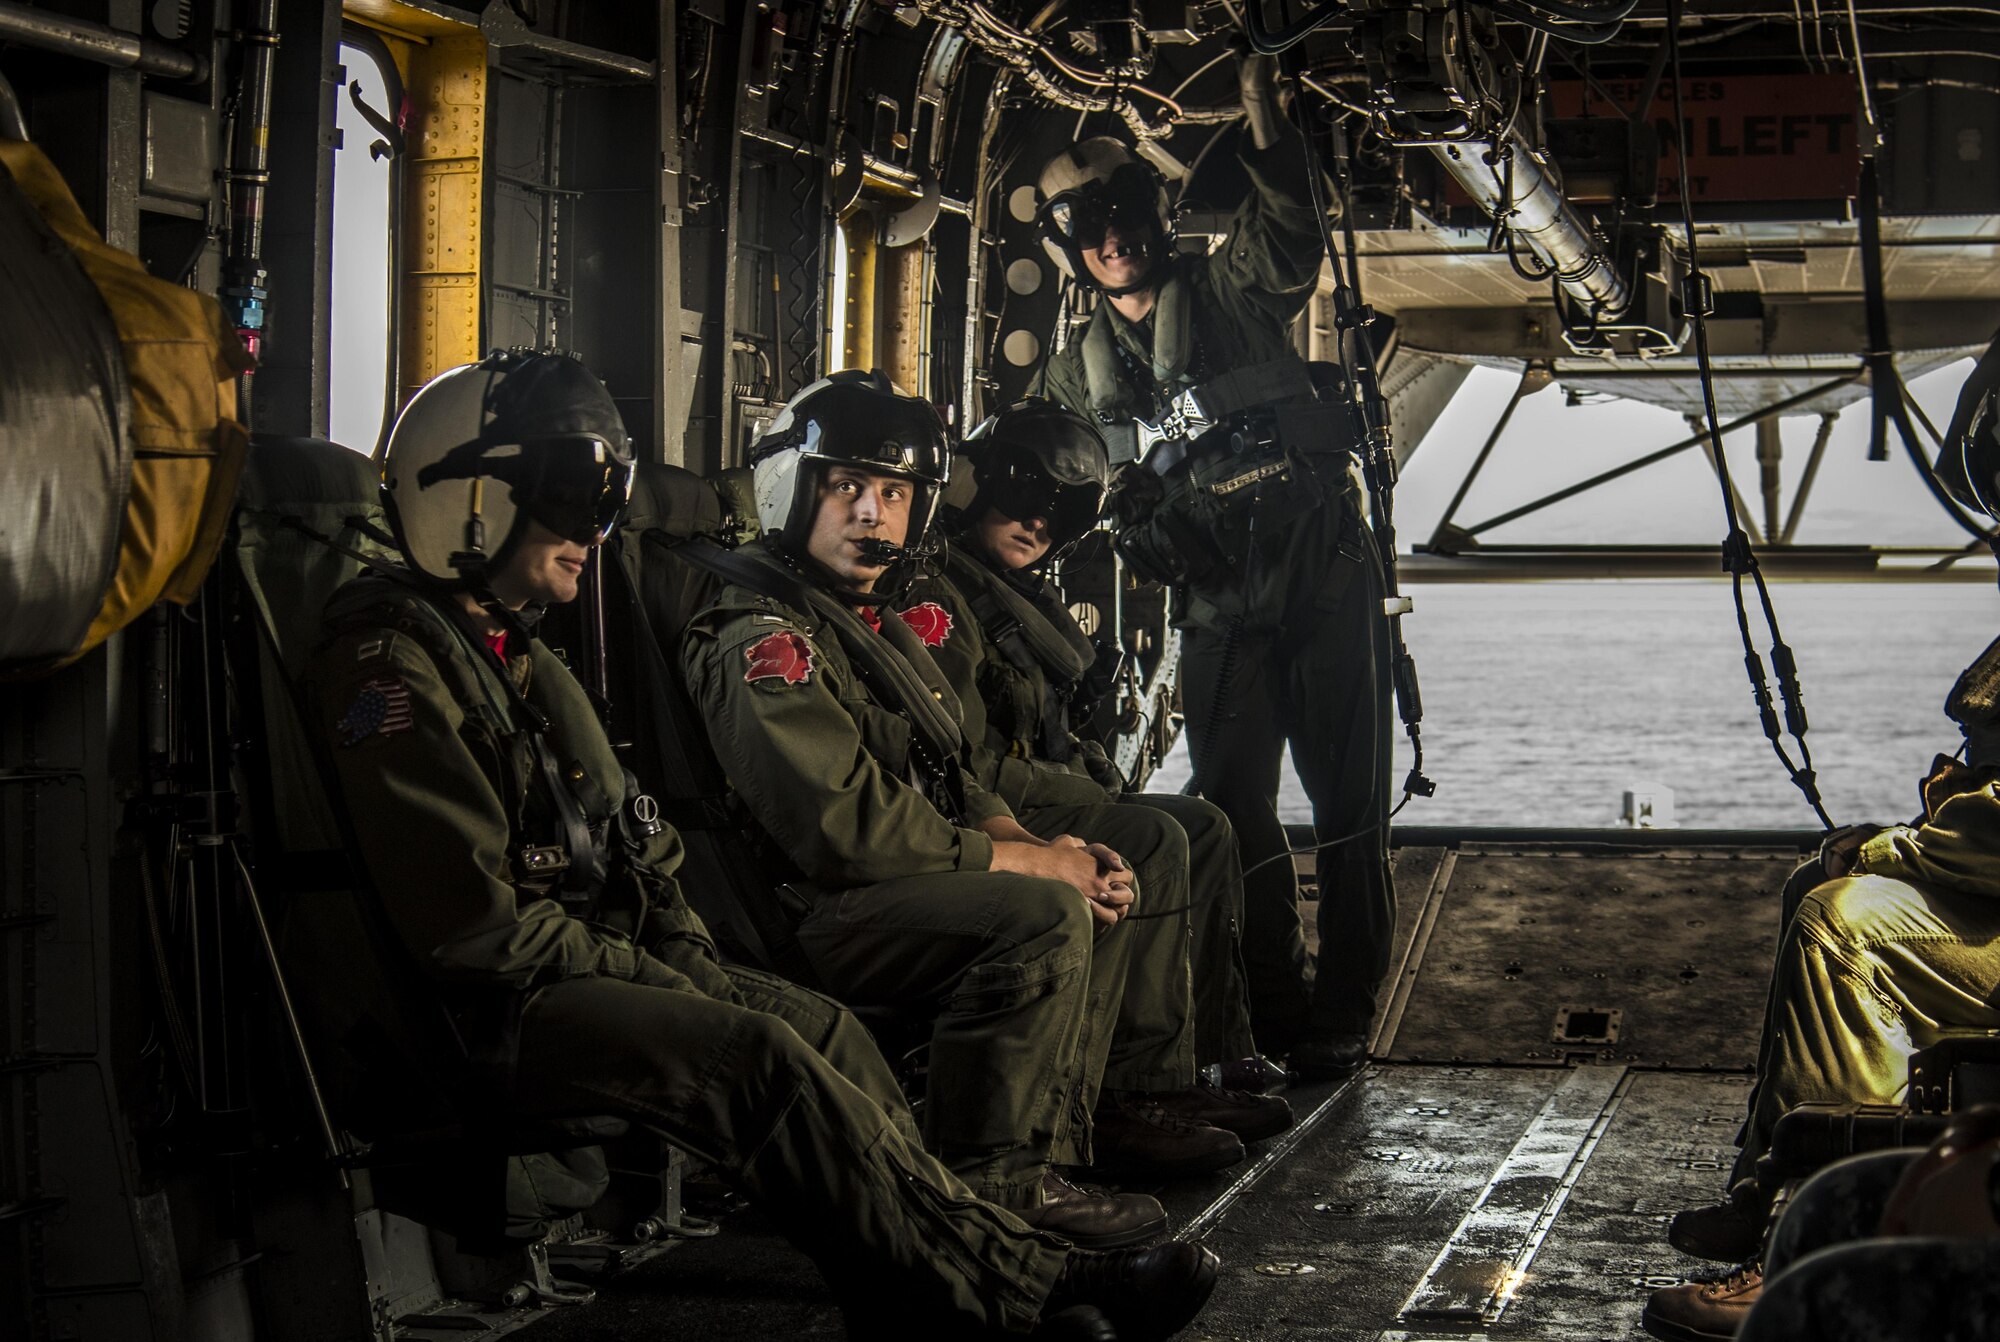 U.S. Navy Sailors with the Helicopter Mine Countermeasures Squadron 14, Detachment 2A, ride in the back of an MH-53E Sea Dragon while taking part in the Mine Countermeasures Exercise 2JA near Misawa Air Base, Japan, July 22, 2016. Though originally stationed in Norfolk, Virginia, the detachment is currently forward deployed to Pohang, Republic of Korea. The unit participated in the 15-day Japan Maritime Self-Defense Force exercise to bolster mine countermeasures capabilities and enhance interoperability between the two allied nations. (U.S. Air Force photo by Senior Airman Jordyn Fetter)